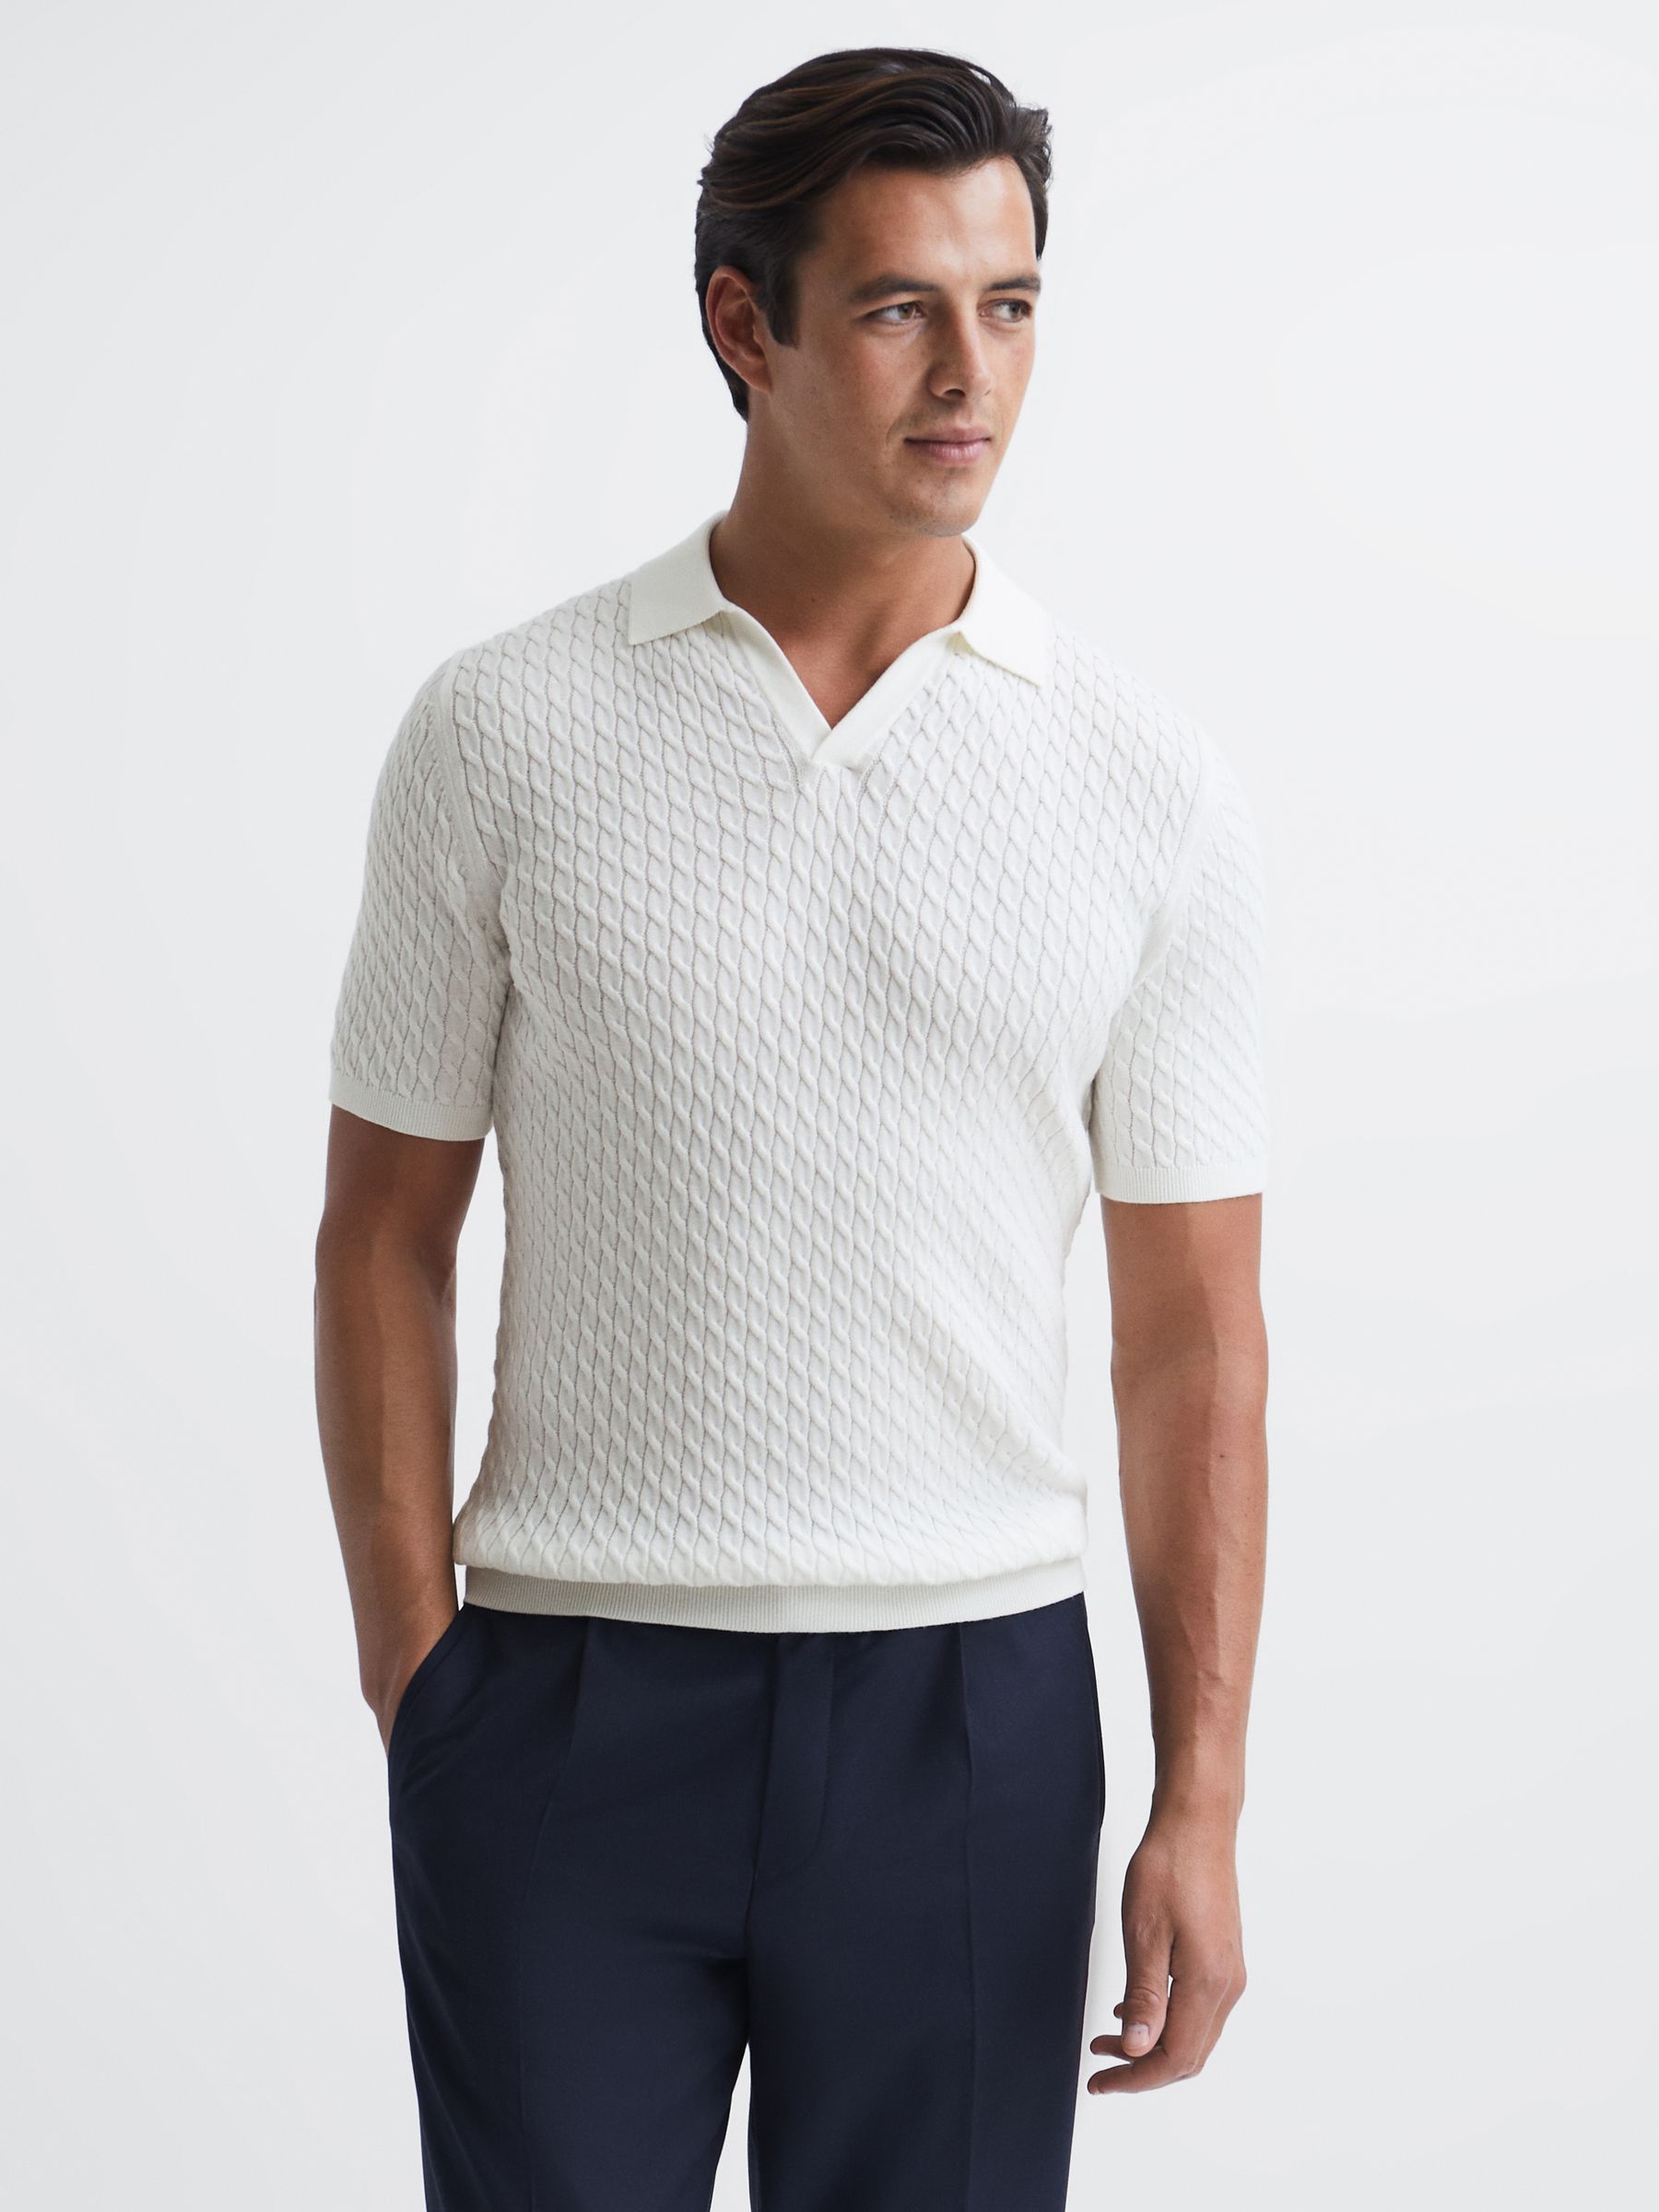 Reiss Federico Slim Fit Cable Knit Open Collar Polo Shirt - REISS